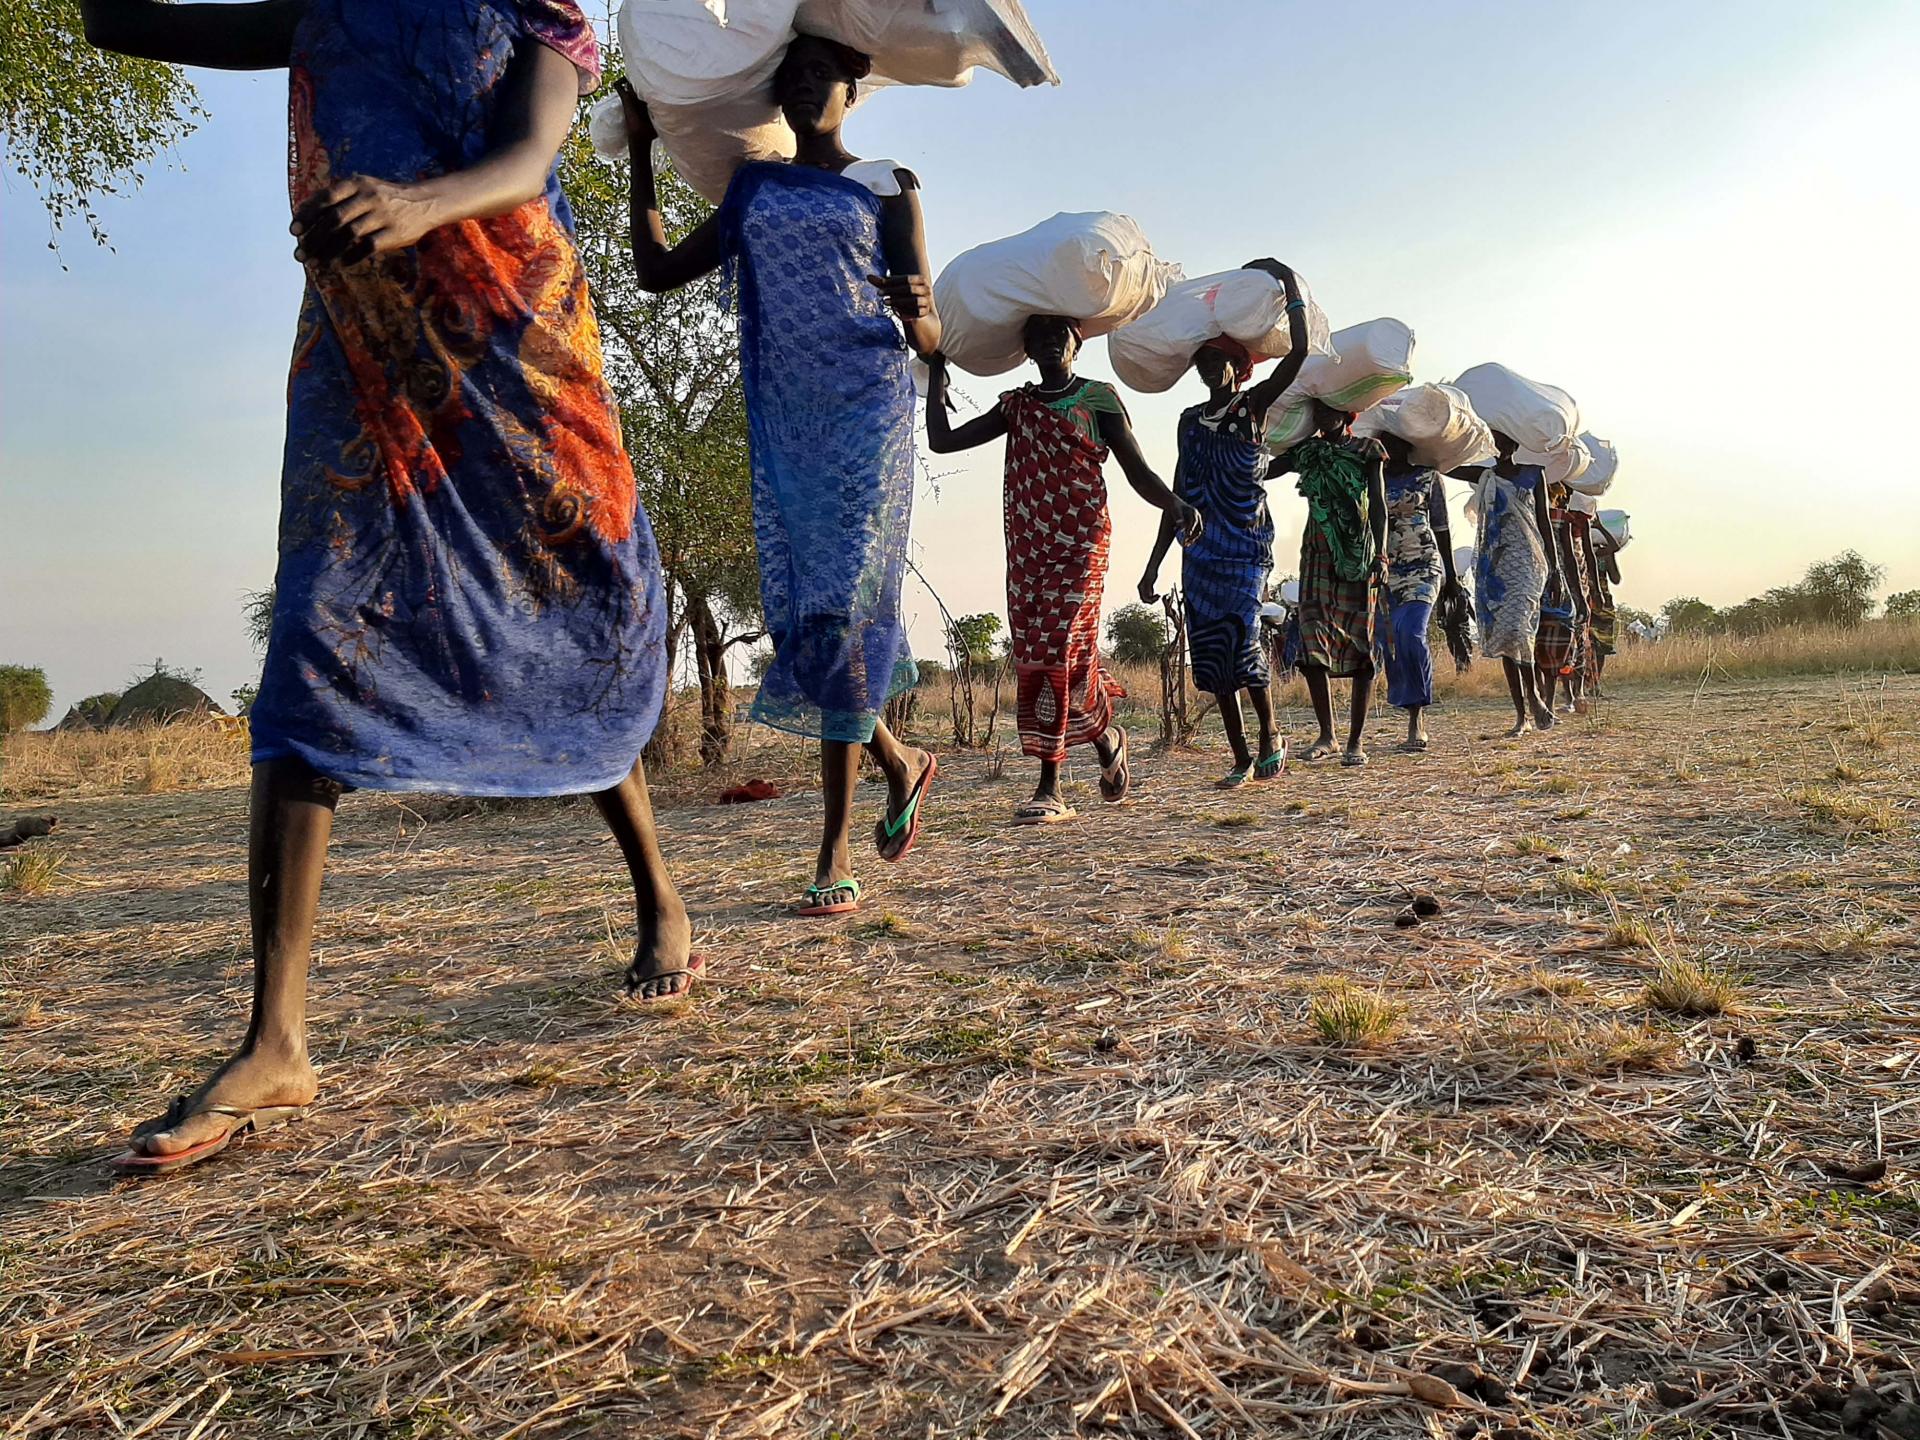 Women from Riang, Jonglei state, carry items that MSF will distribute to local families, South Sudan